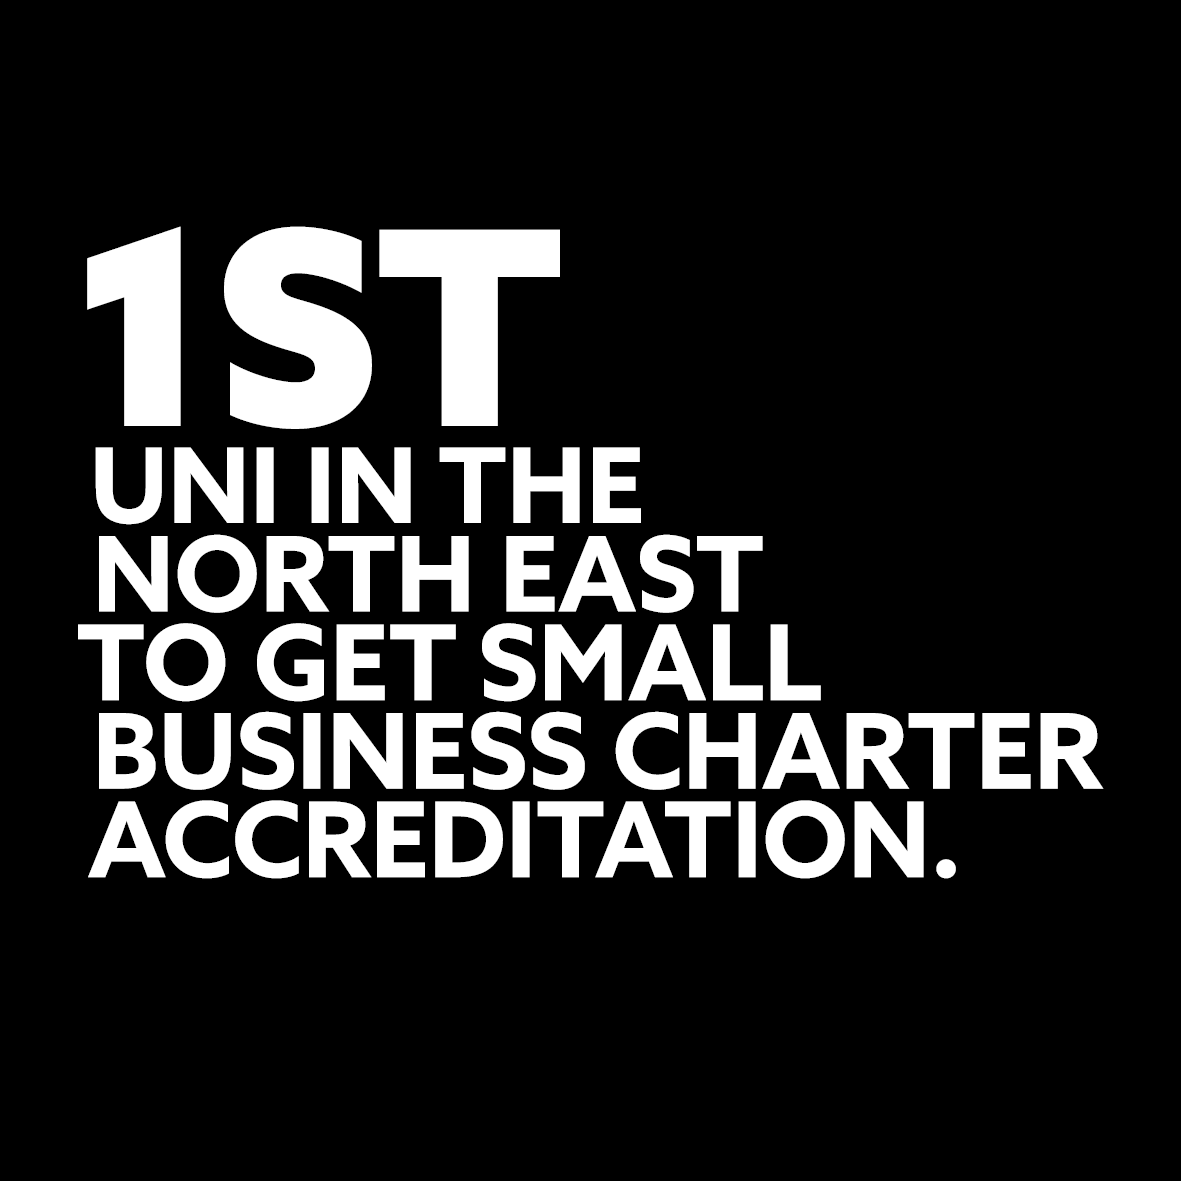 1ST IN THE NORTH EAST TO GET SMALL BUSINESS CHARTER ACCREDITATION